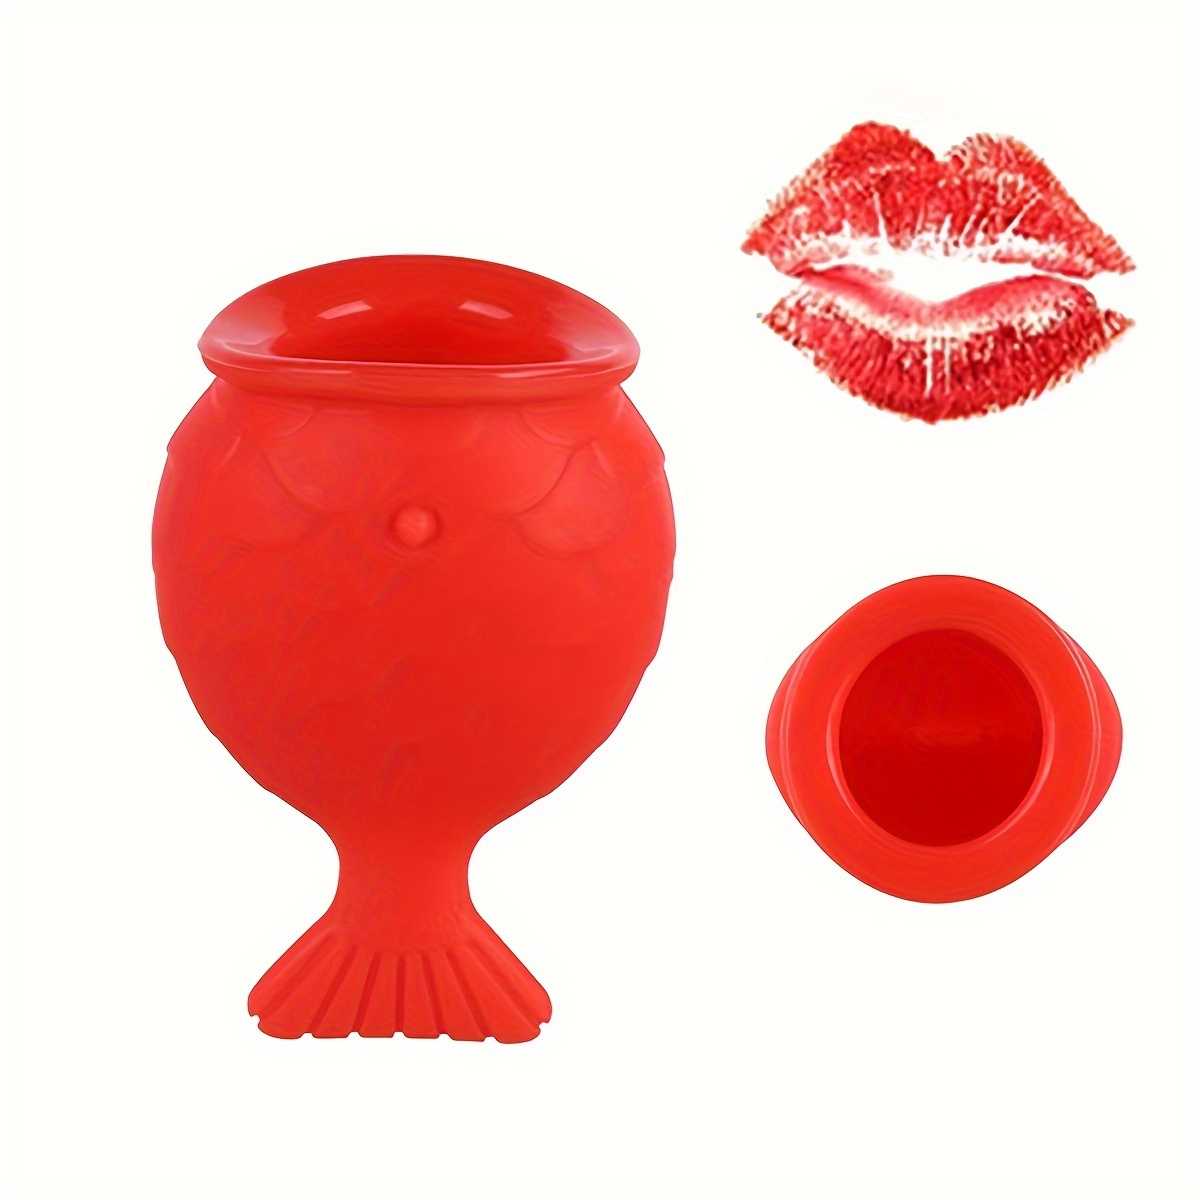 

Fish-shaped Lip Pumper: Silicone Lip Correction Device For Fuller Lips - No Fragrance, Battery-free